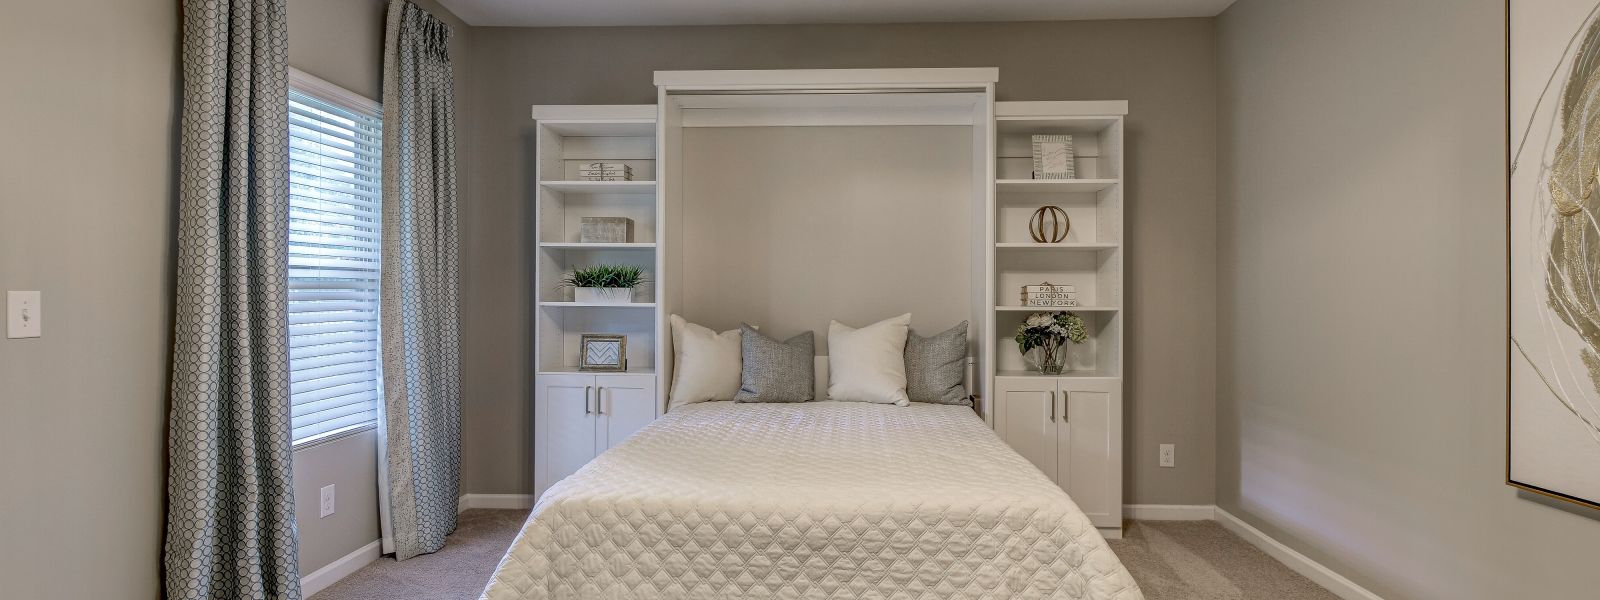 white cabinet wall bed pull down and with white comforter and grey and white pillows